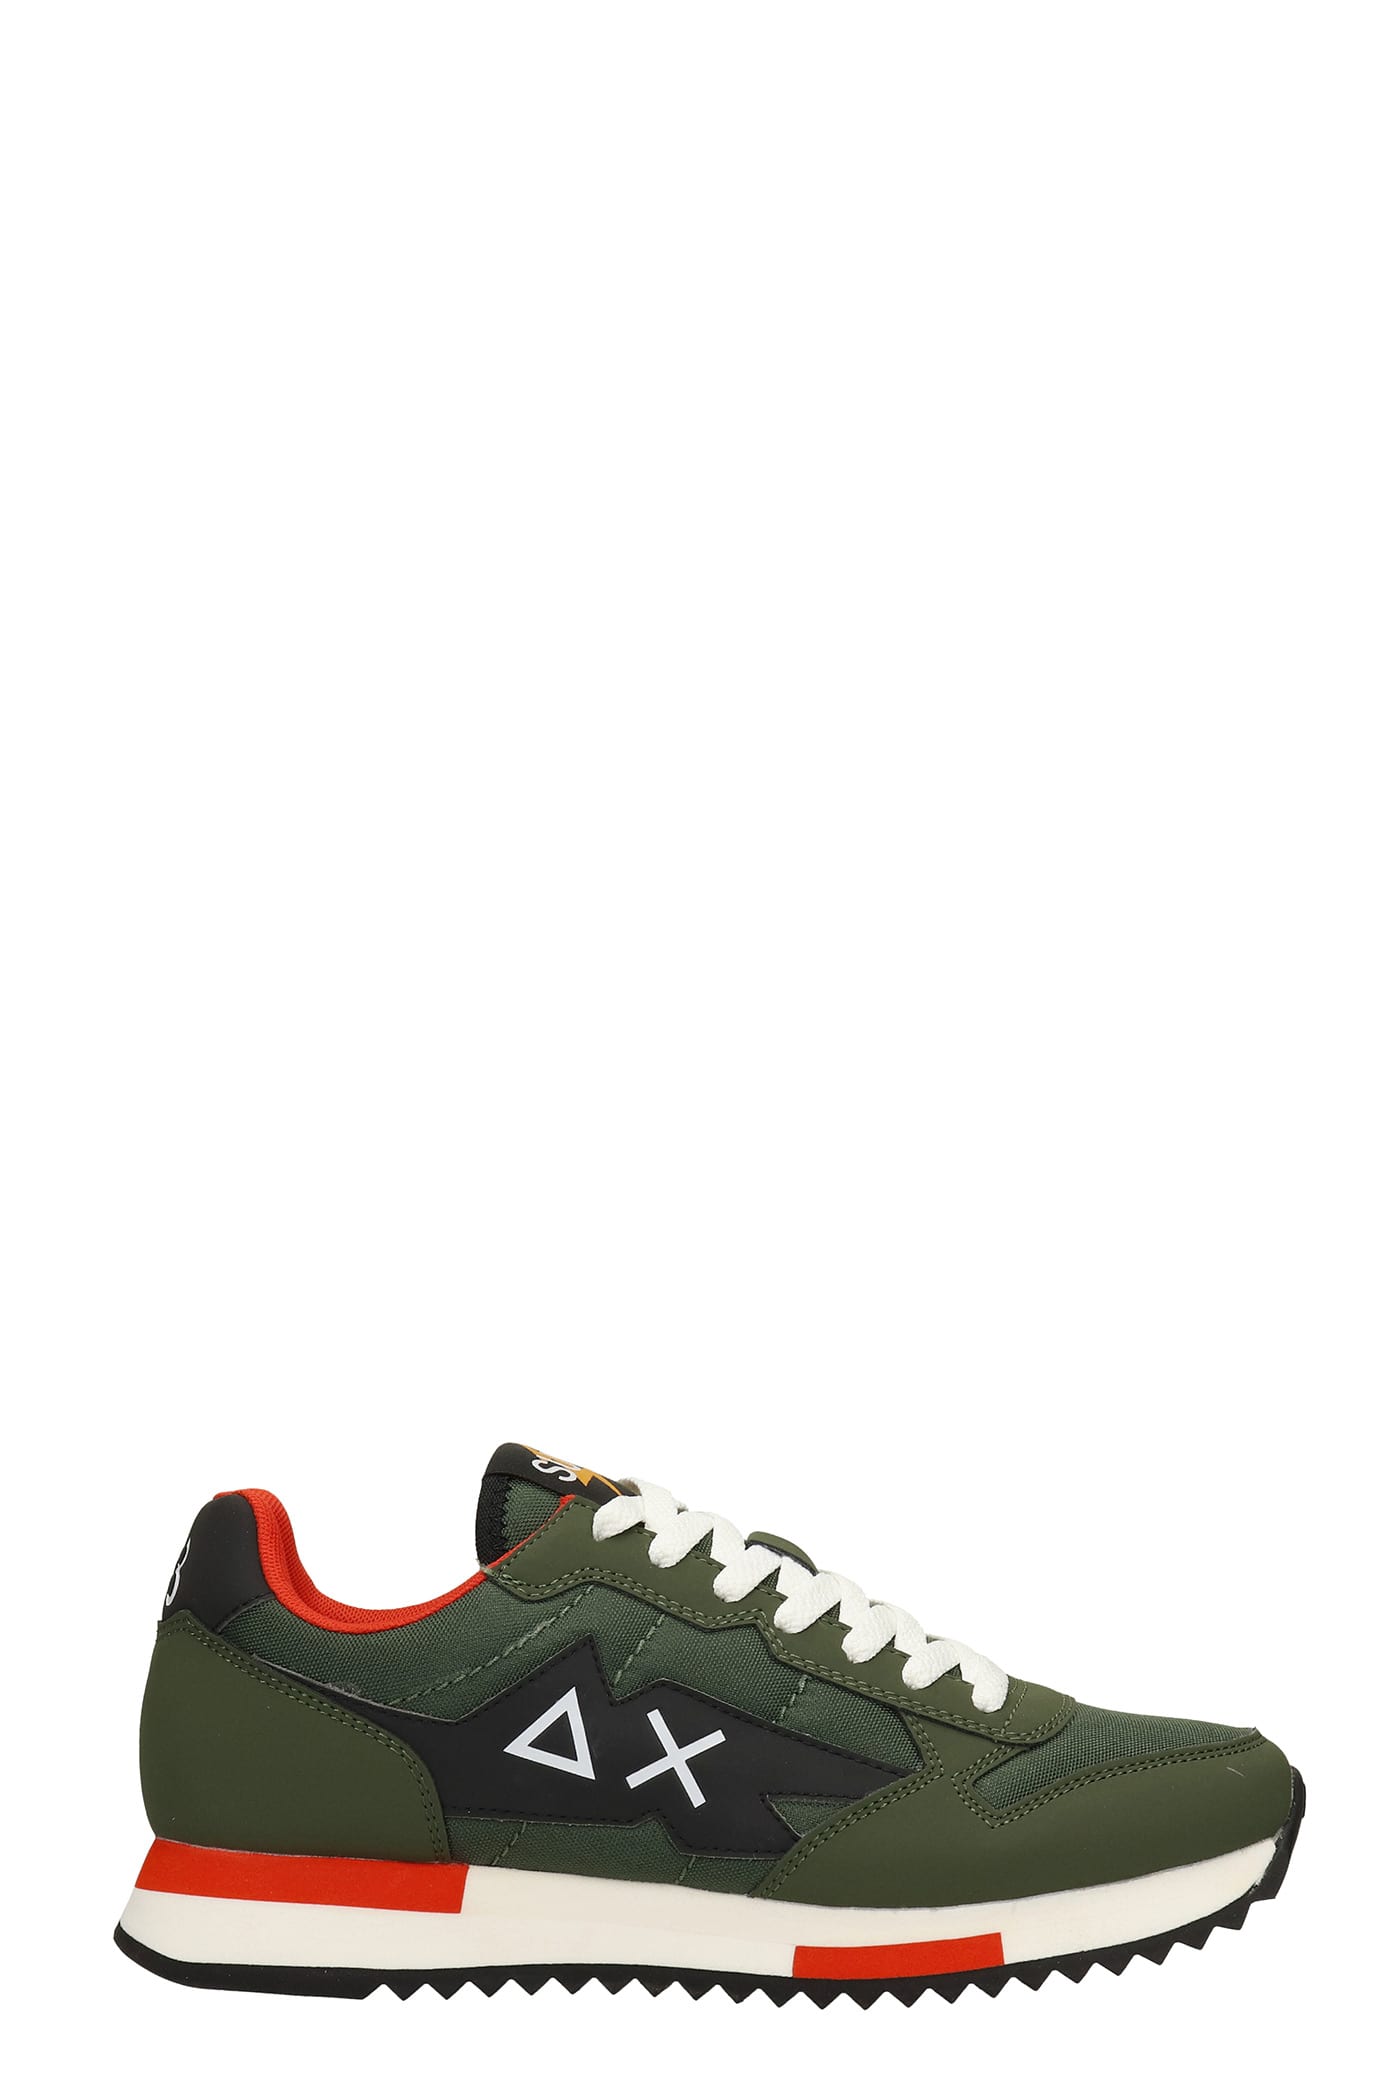 Sun 68 Niki Solid Sneakers In Green Leather And Fabric